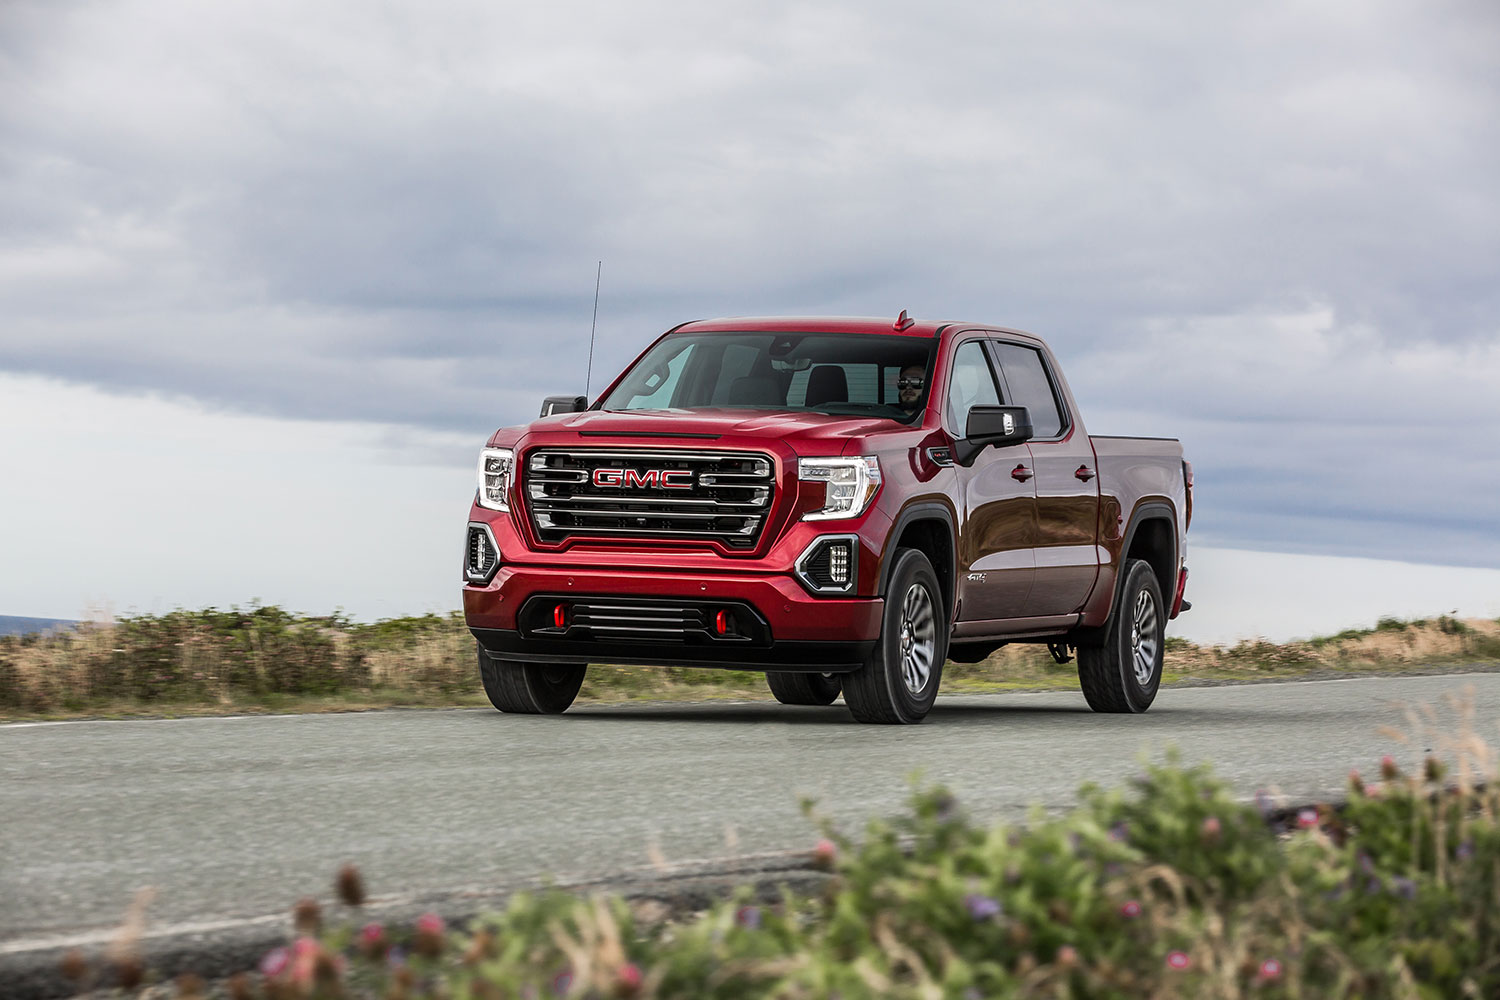 2019 GMC Sierra AT4 review